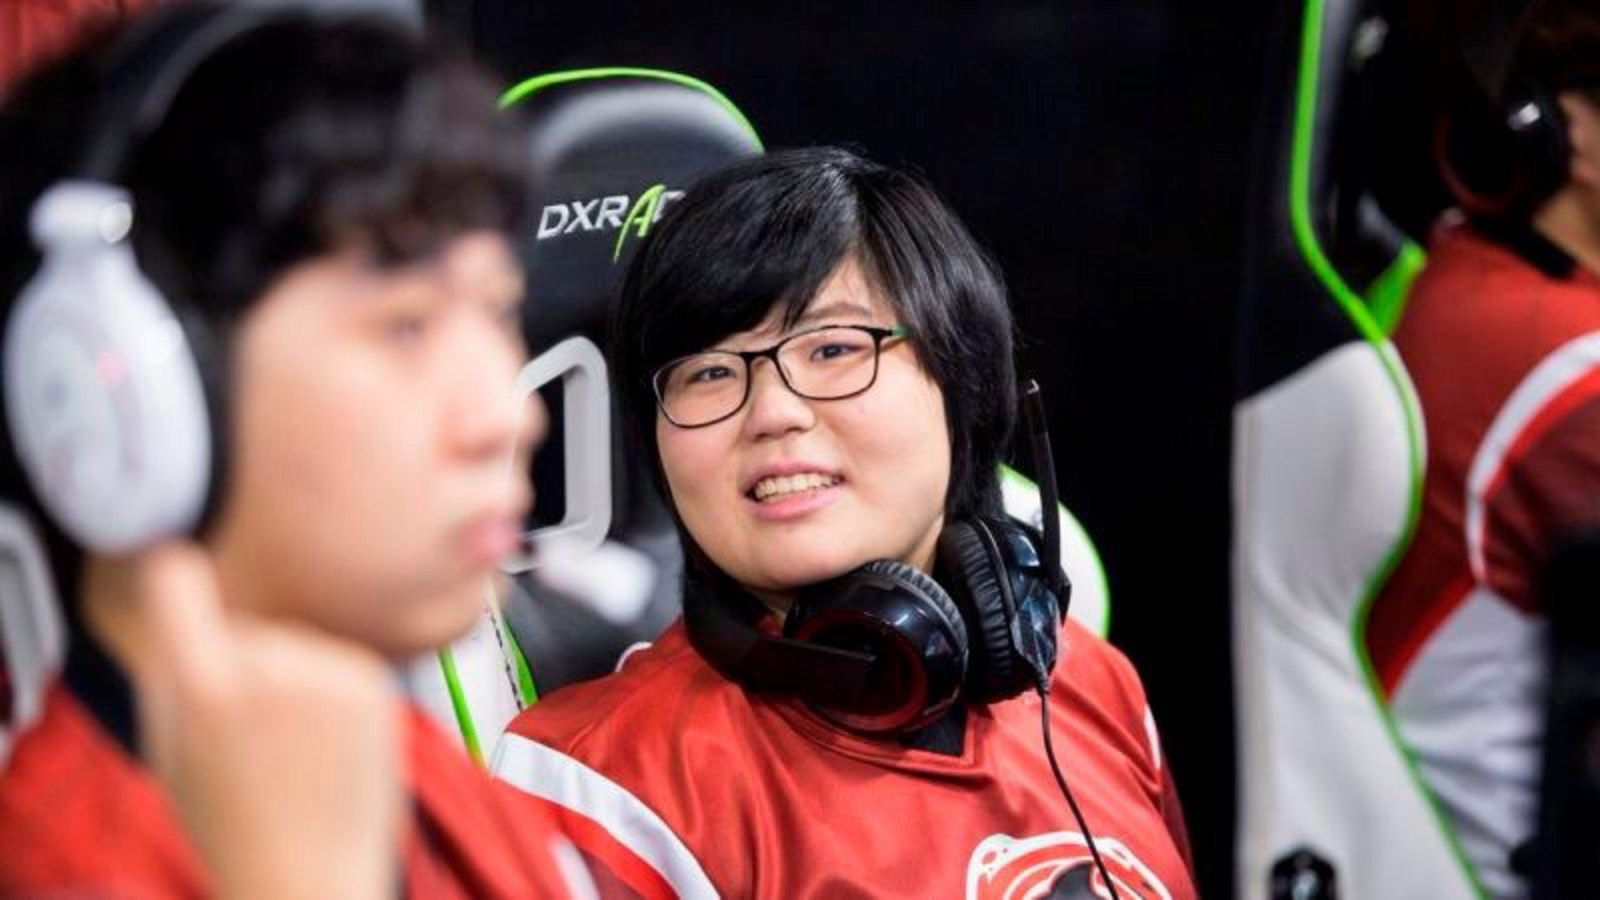 Geguri becomes first female player to join the Overwatch League (Source: Shanghai Dragons/Yong Woo “Kenzi” Kim)